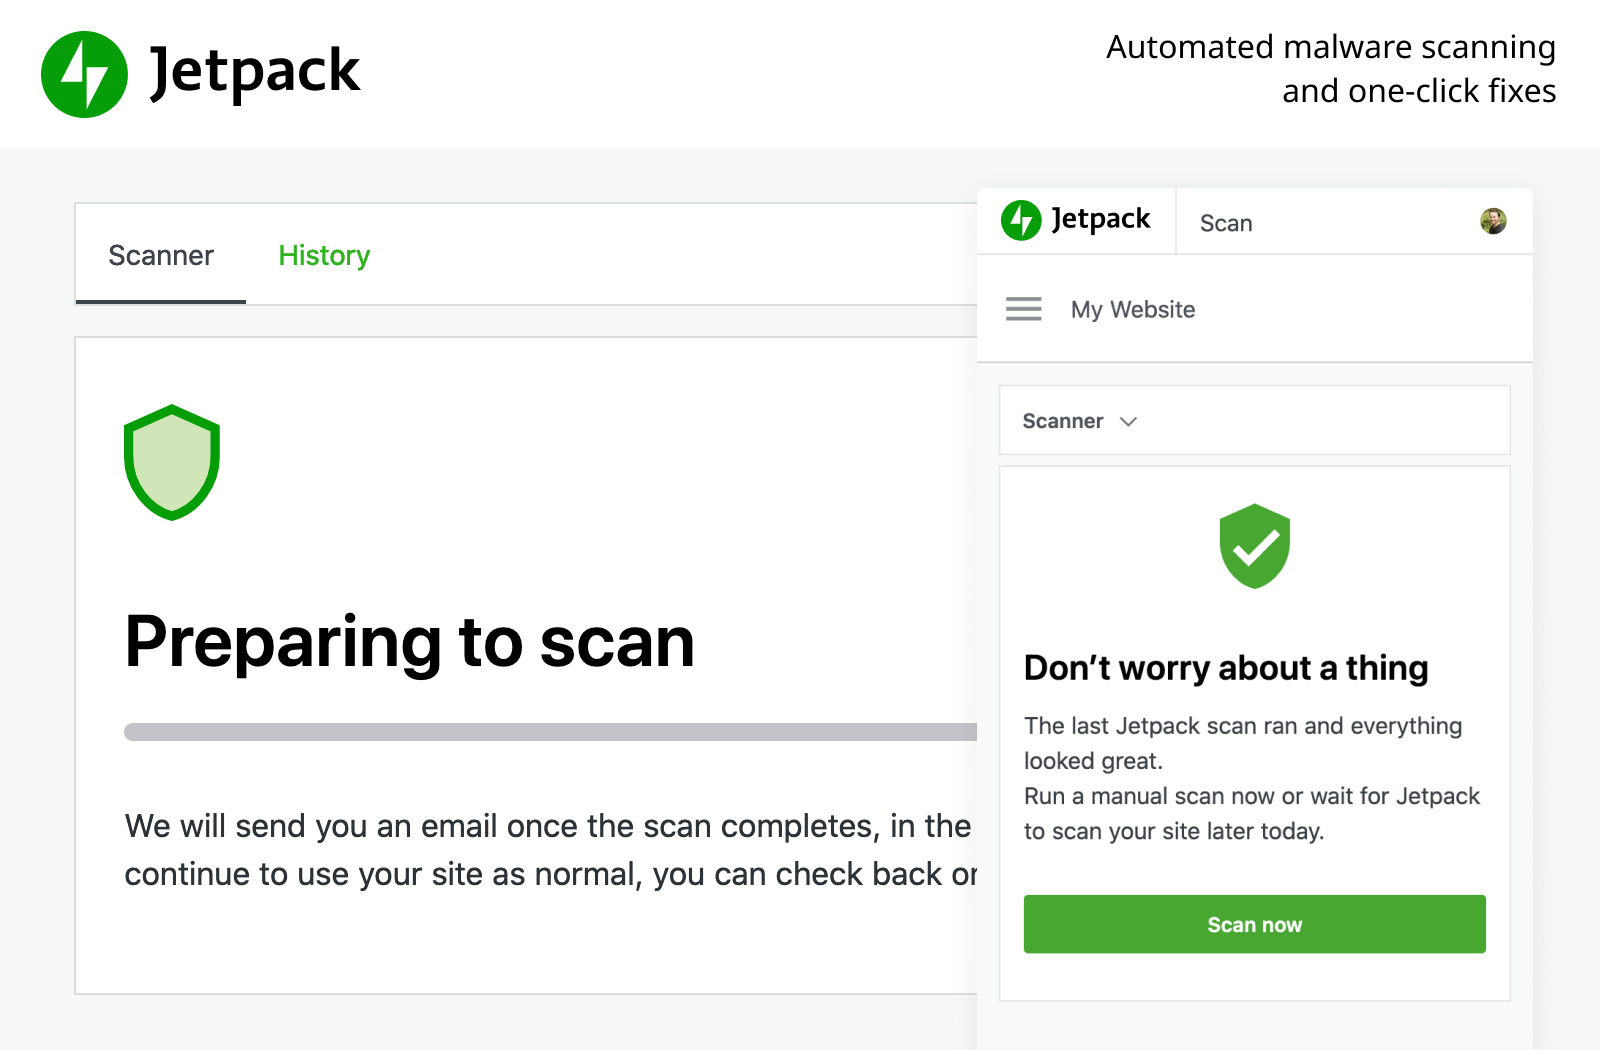 Use a reliable security plugin or perform a manual scan to check for malware.
If any malware is detected, remove it immediately and strengthen security measures.